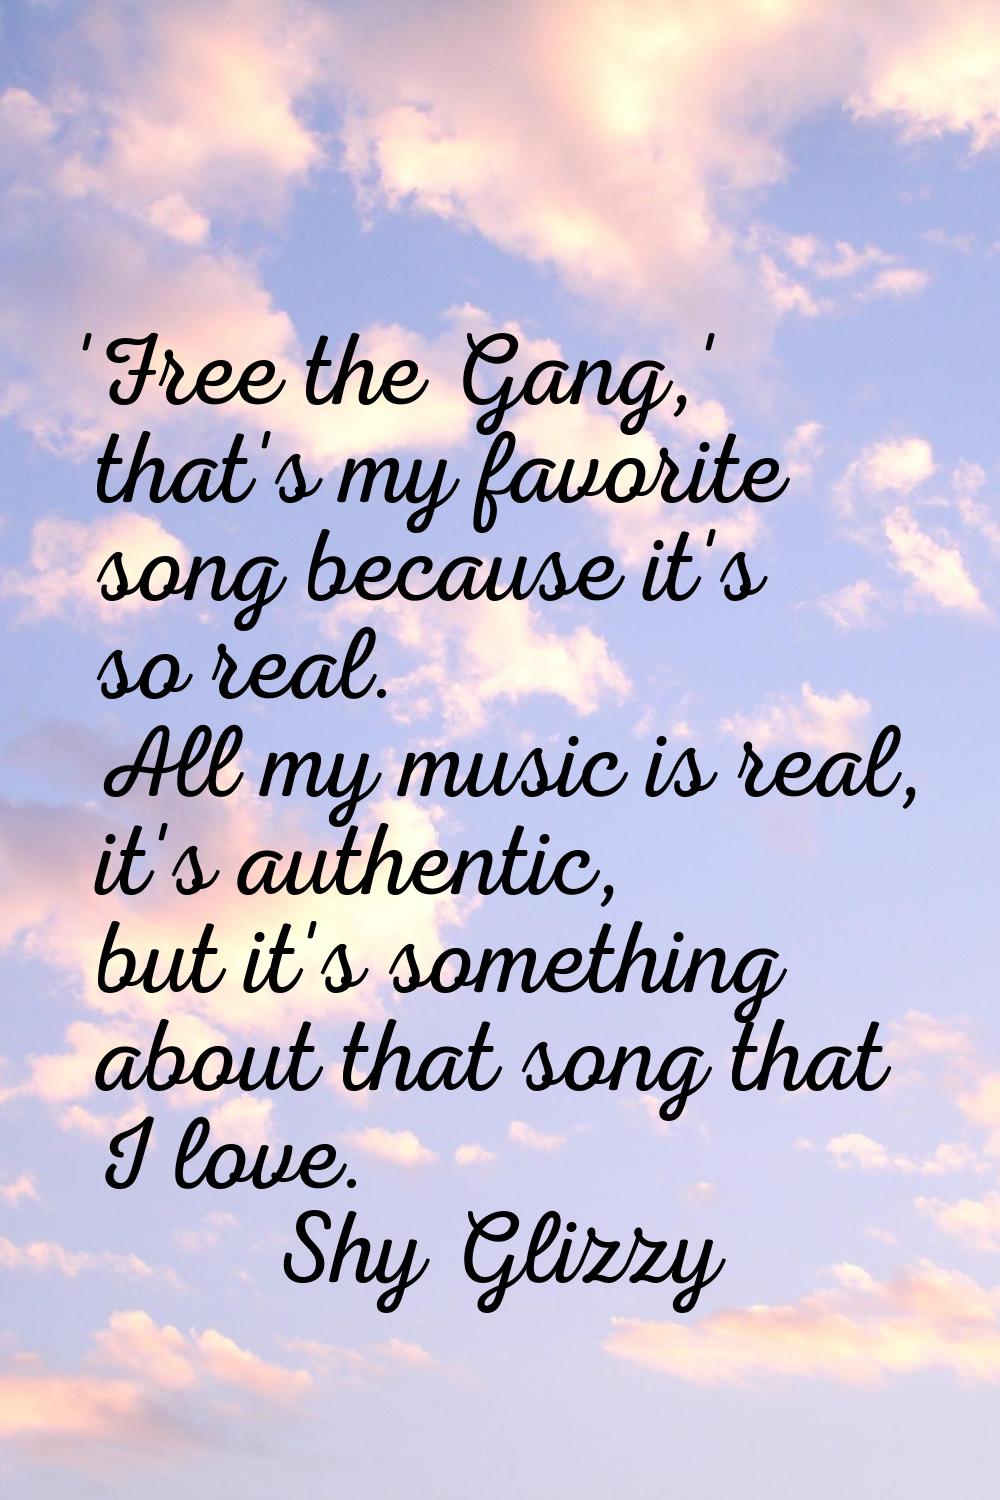 'Free the Gang,' that's my favorite song because it's so real. All my music is real, it's authentic